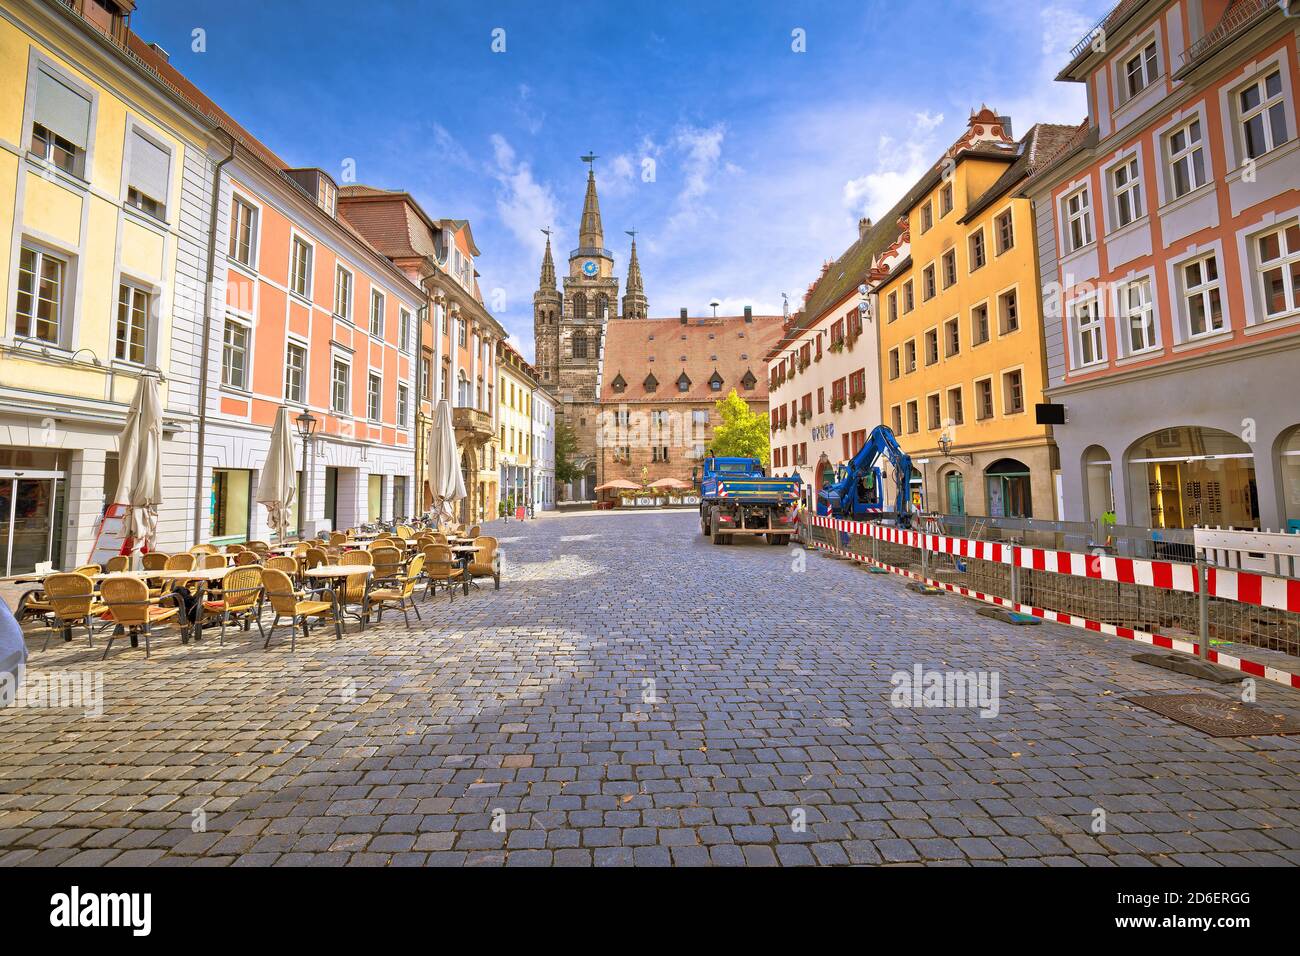 Ansbach. Old town of Ansbach picturesque square view, Bavaria region of Germany Stock Photo